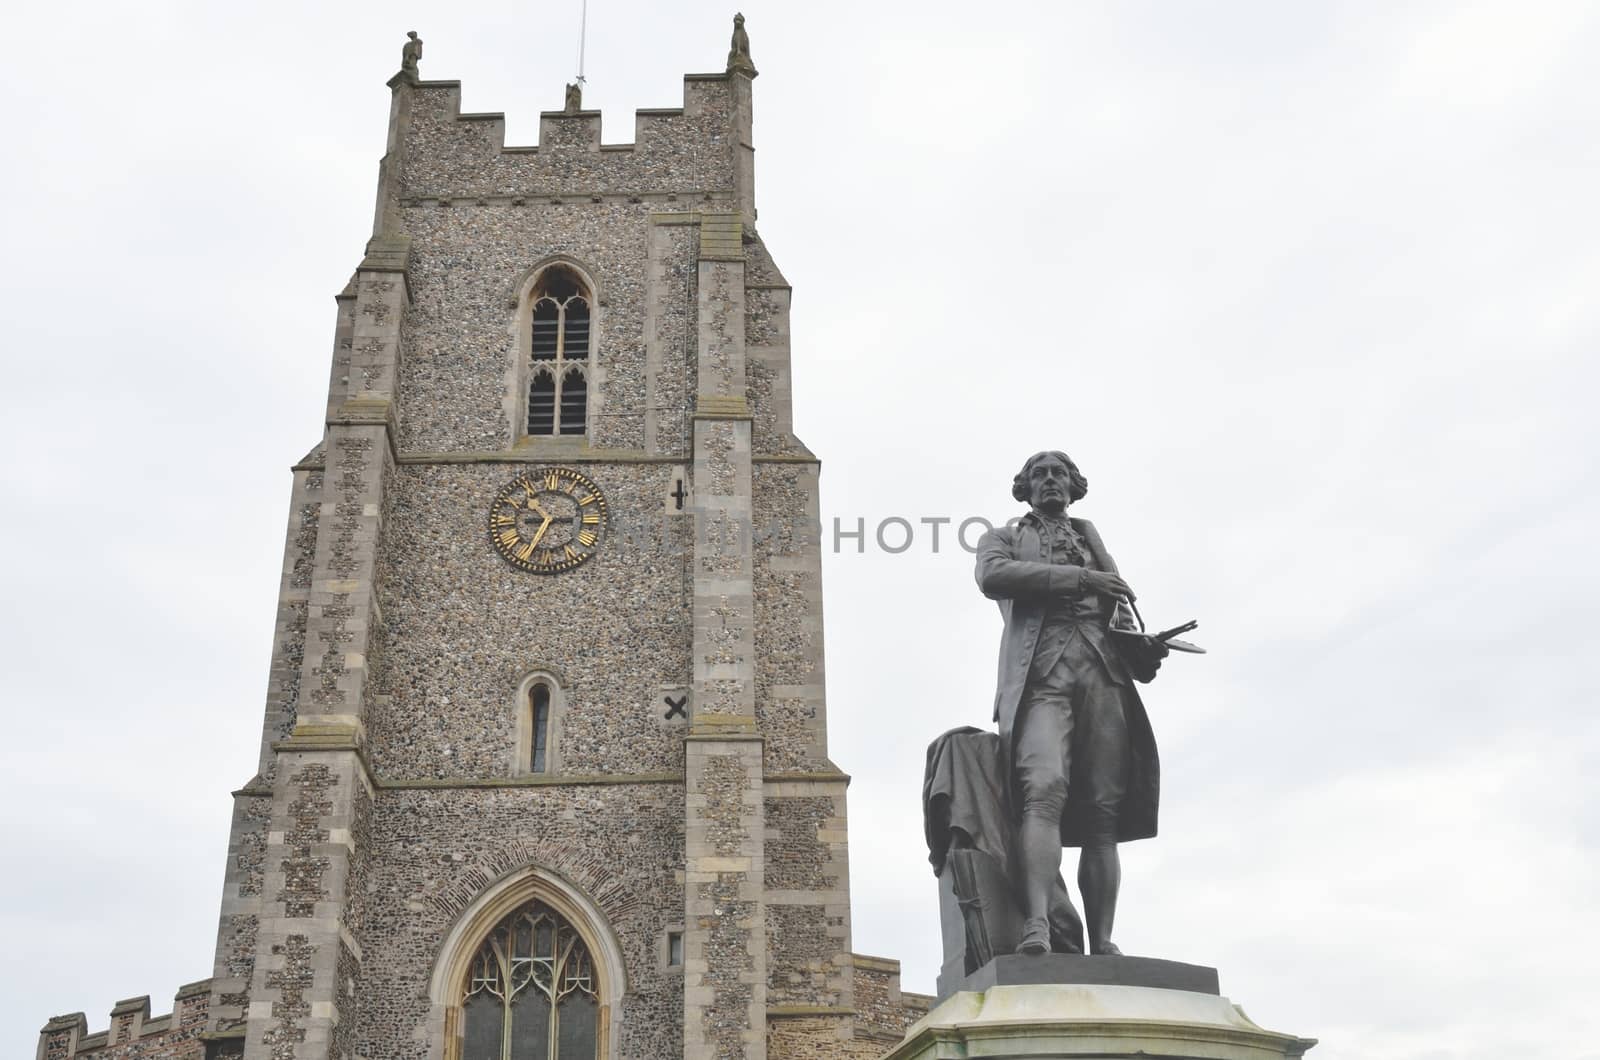 Church and statue at sudbury suffolk by pauws99